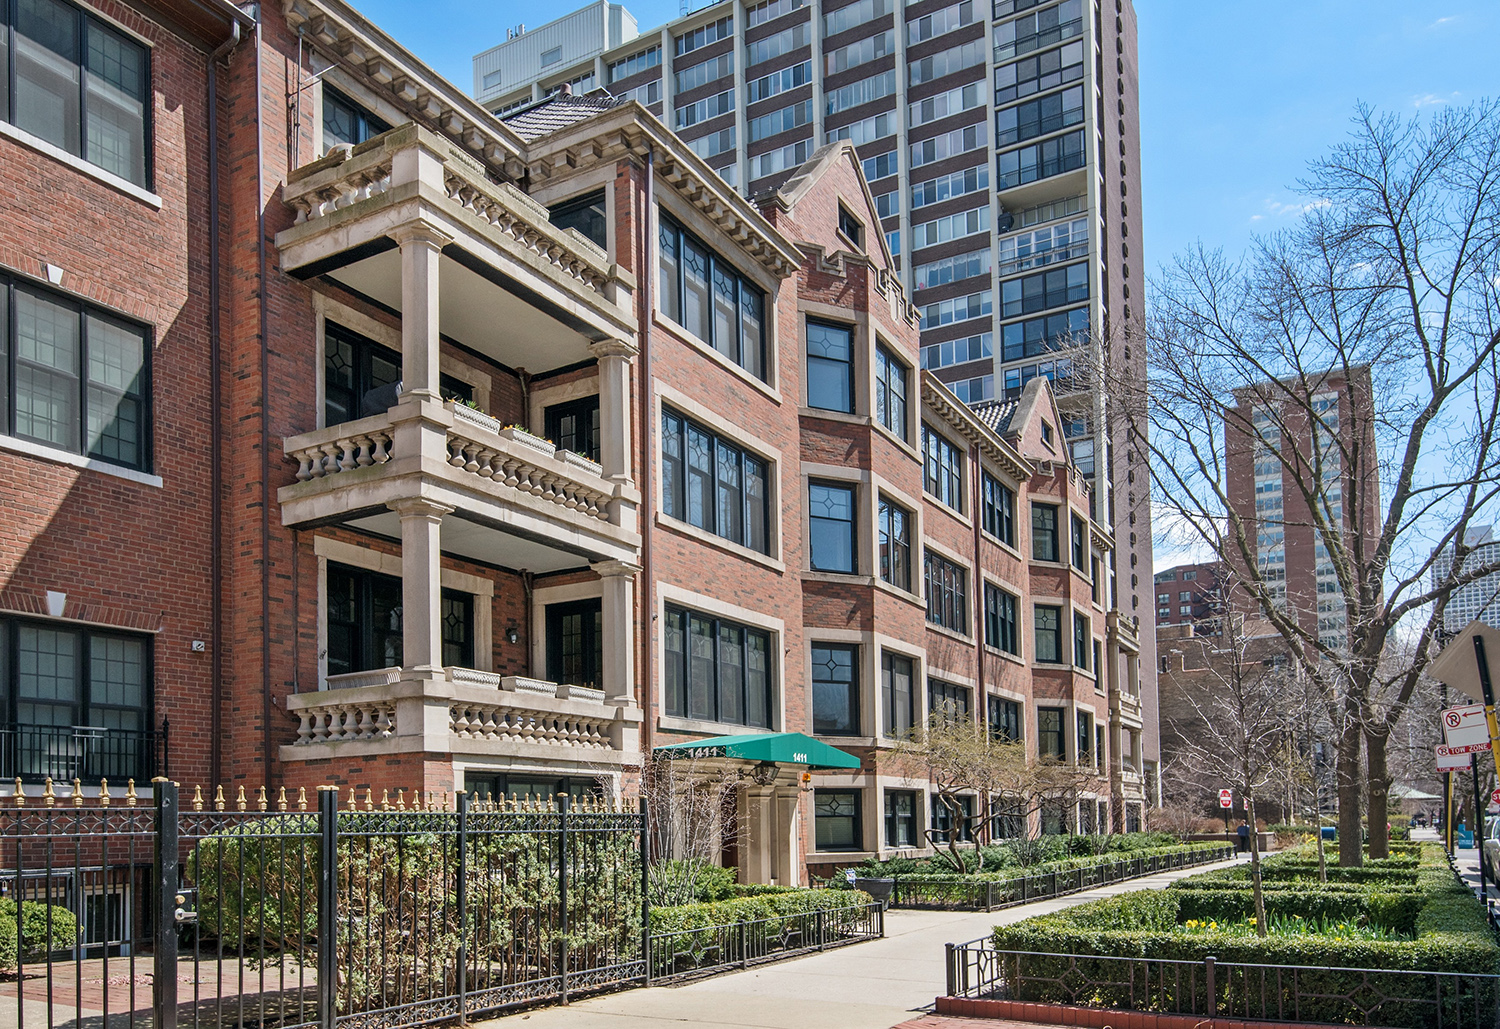 Real estate market in Chicago is heating up